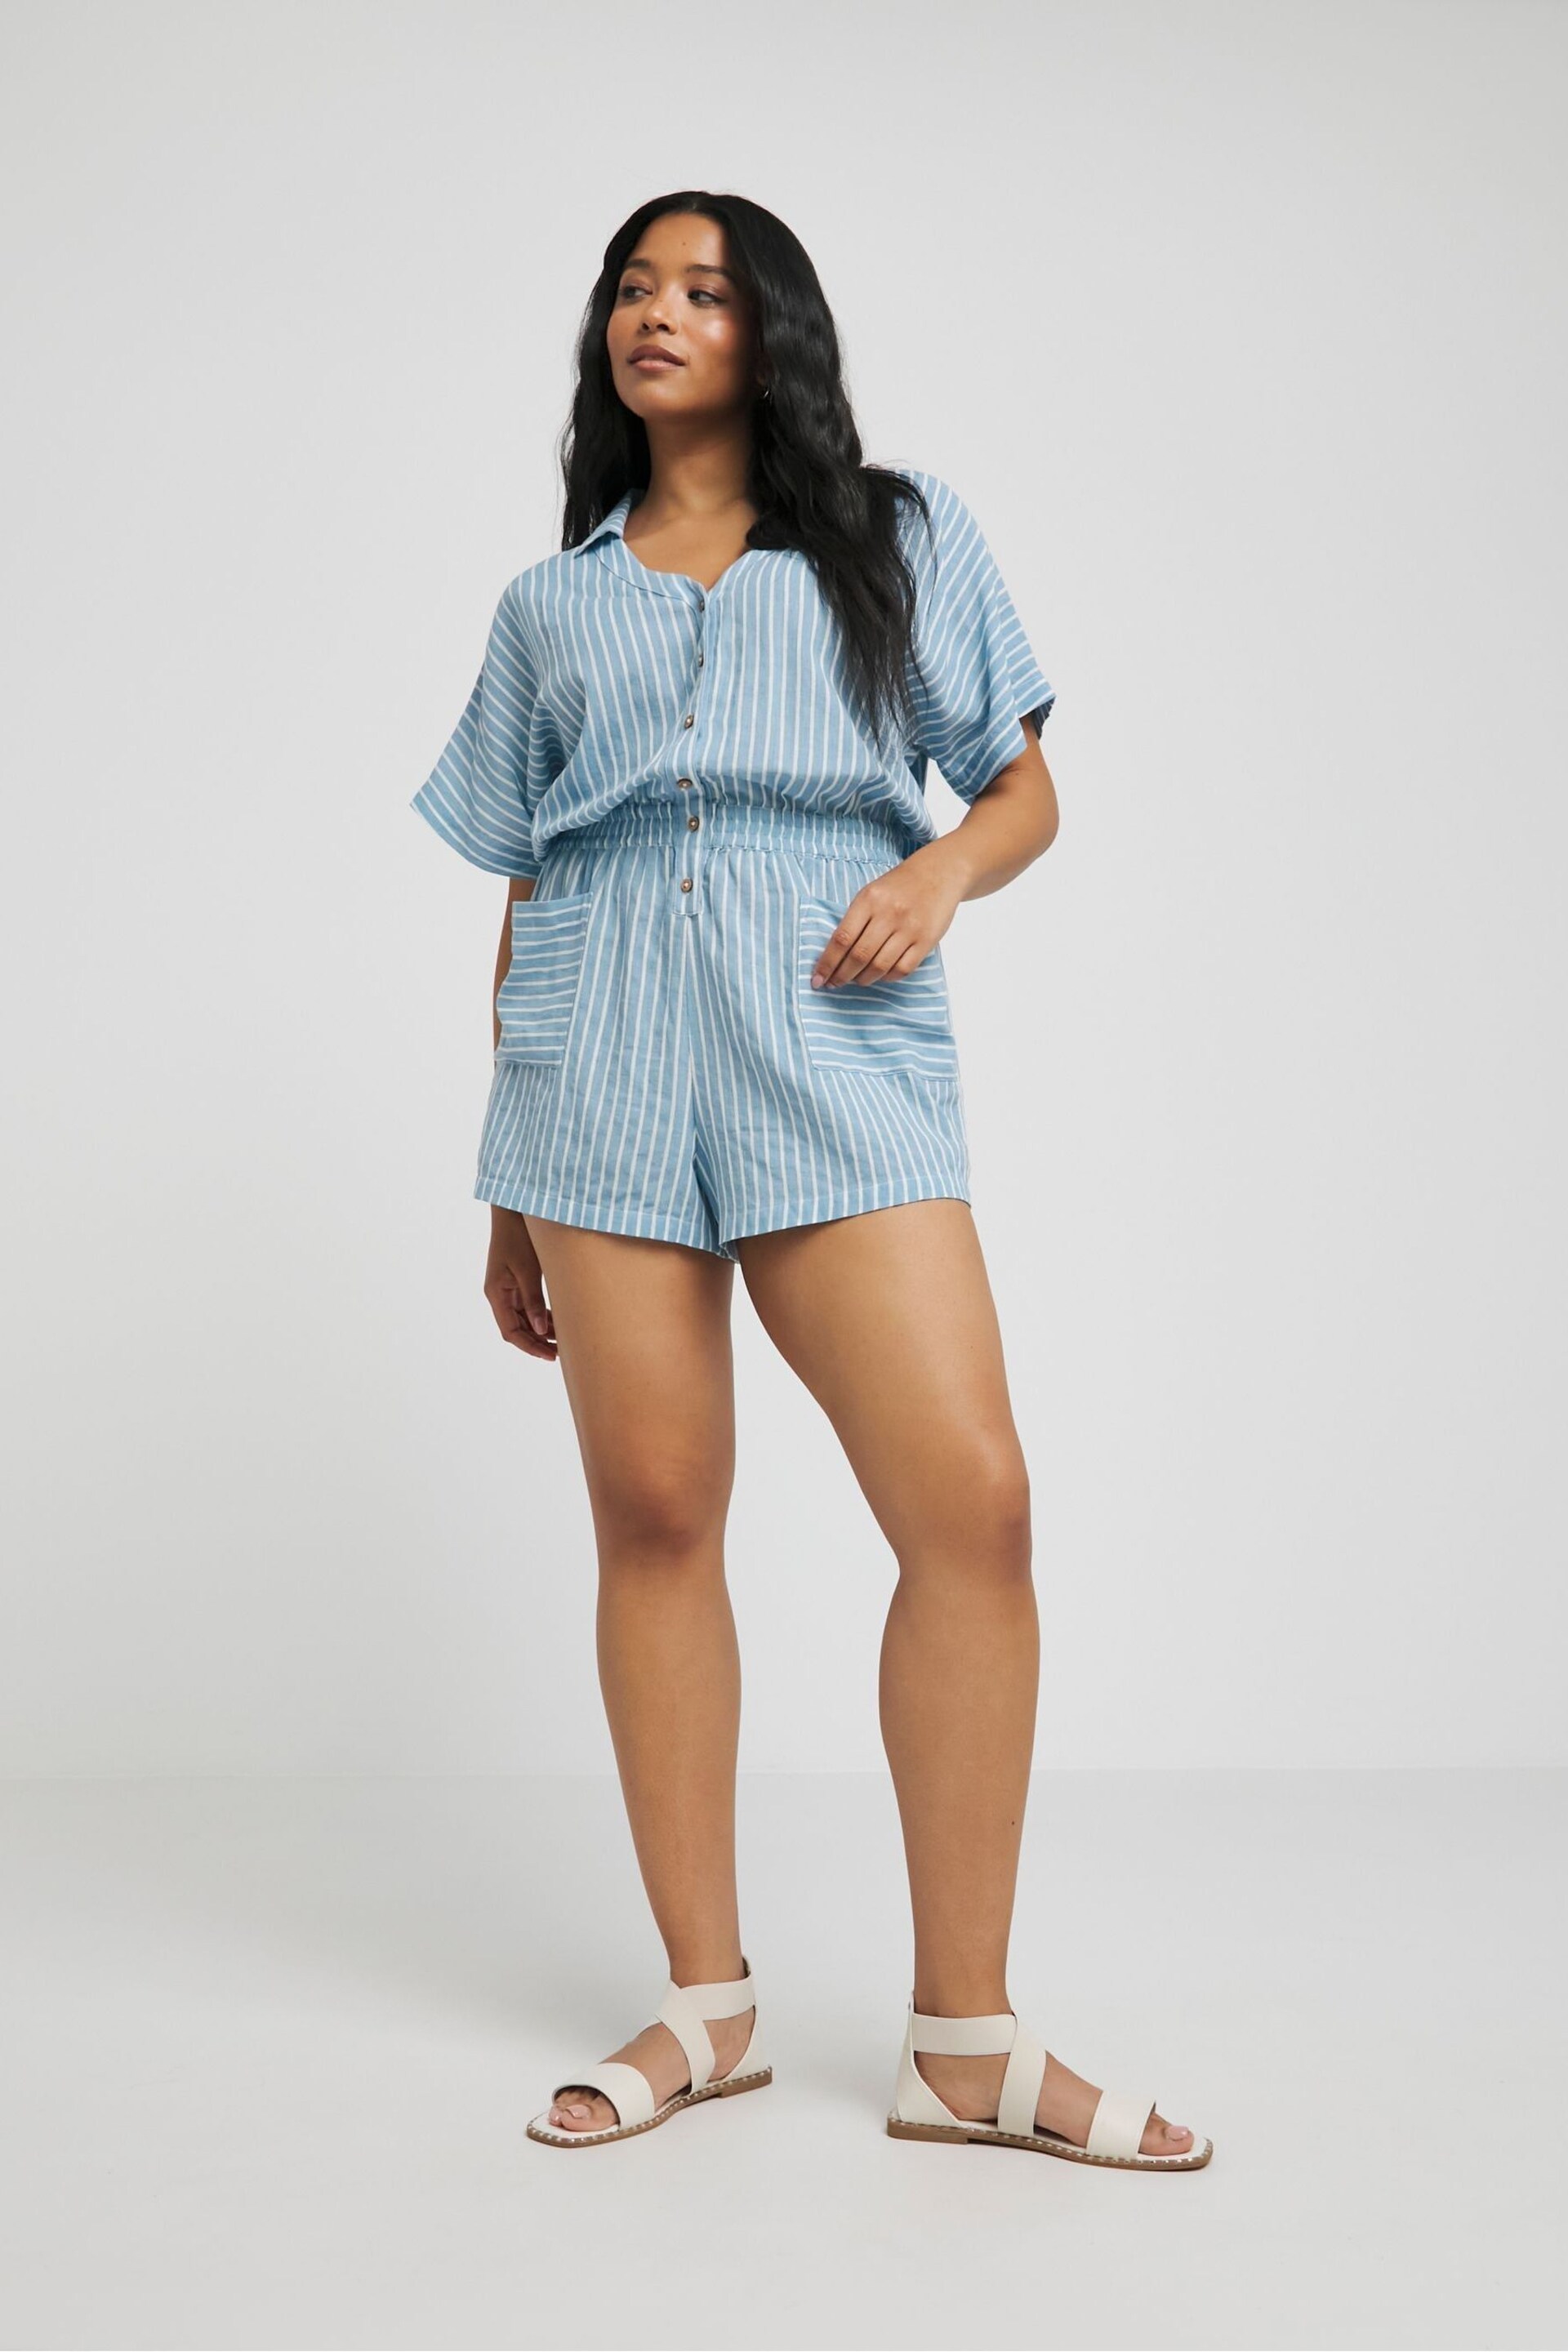 Simply Be Blue Cheesecloth Beach Playsuit - Image 1 of 4